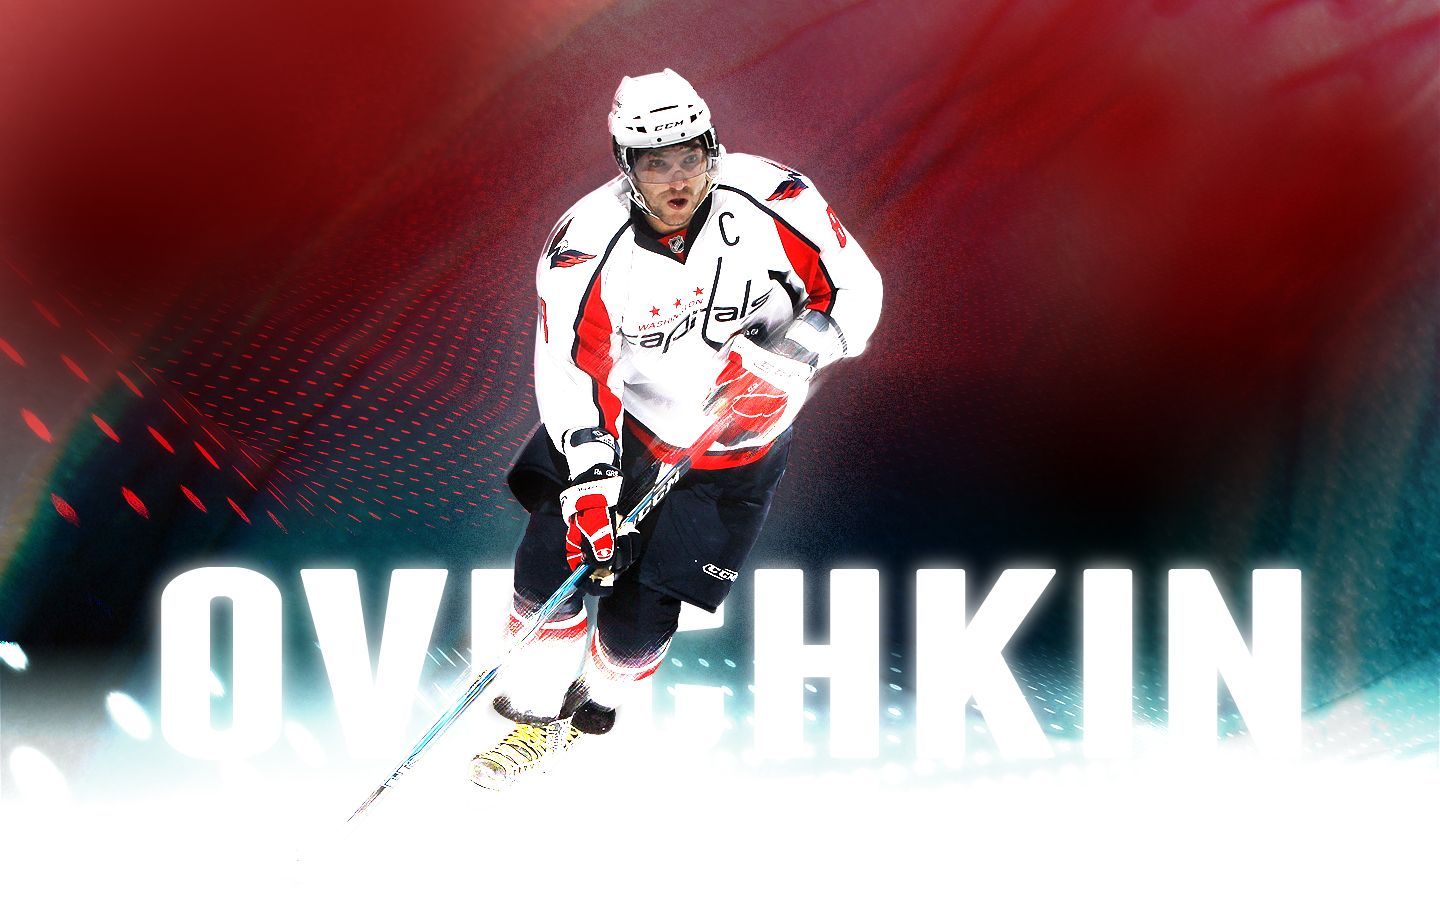 Alex Ovechkin Wallpapers High Resolution and Quality Download